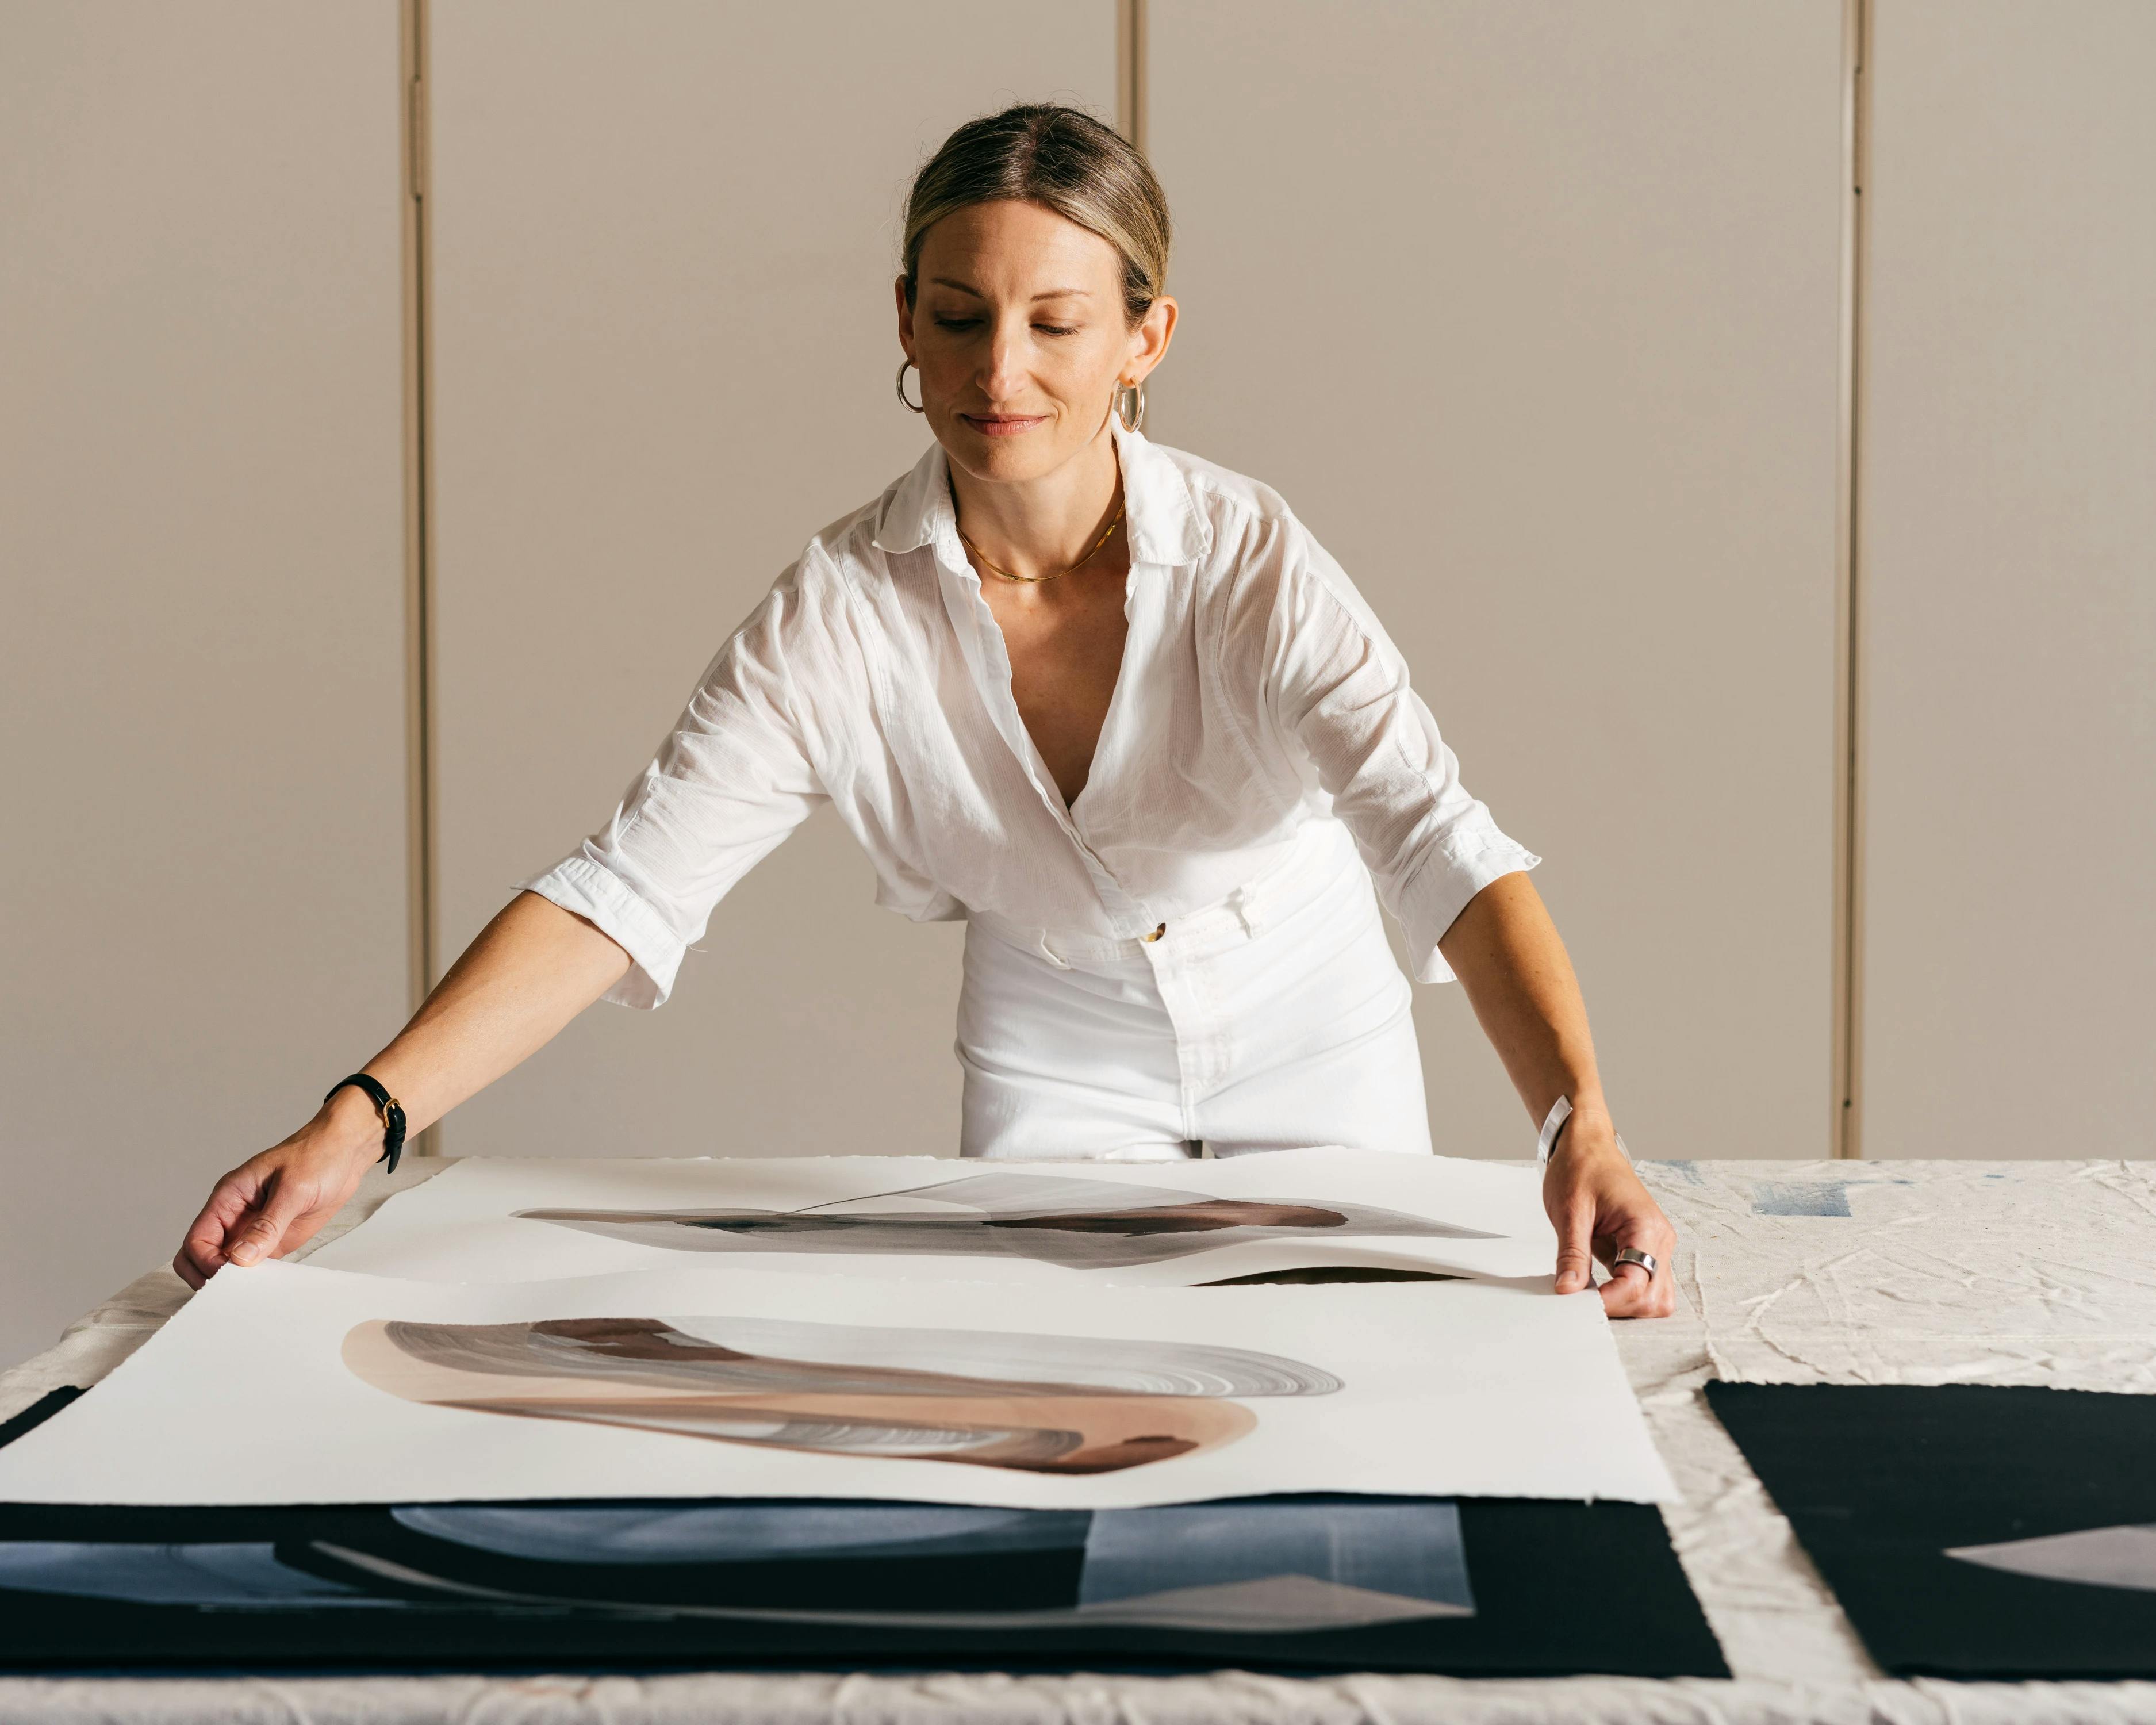 Artist Laura Naples moves large paintings on paper across a table at MacArthur Place.